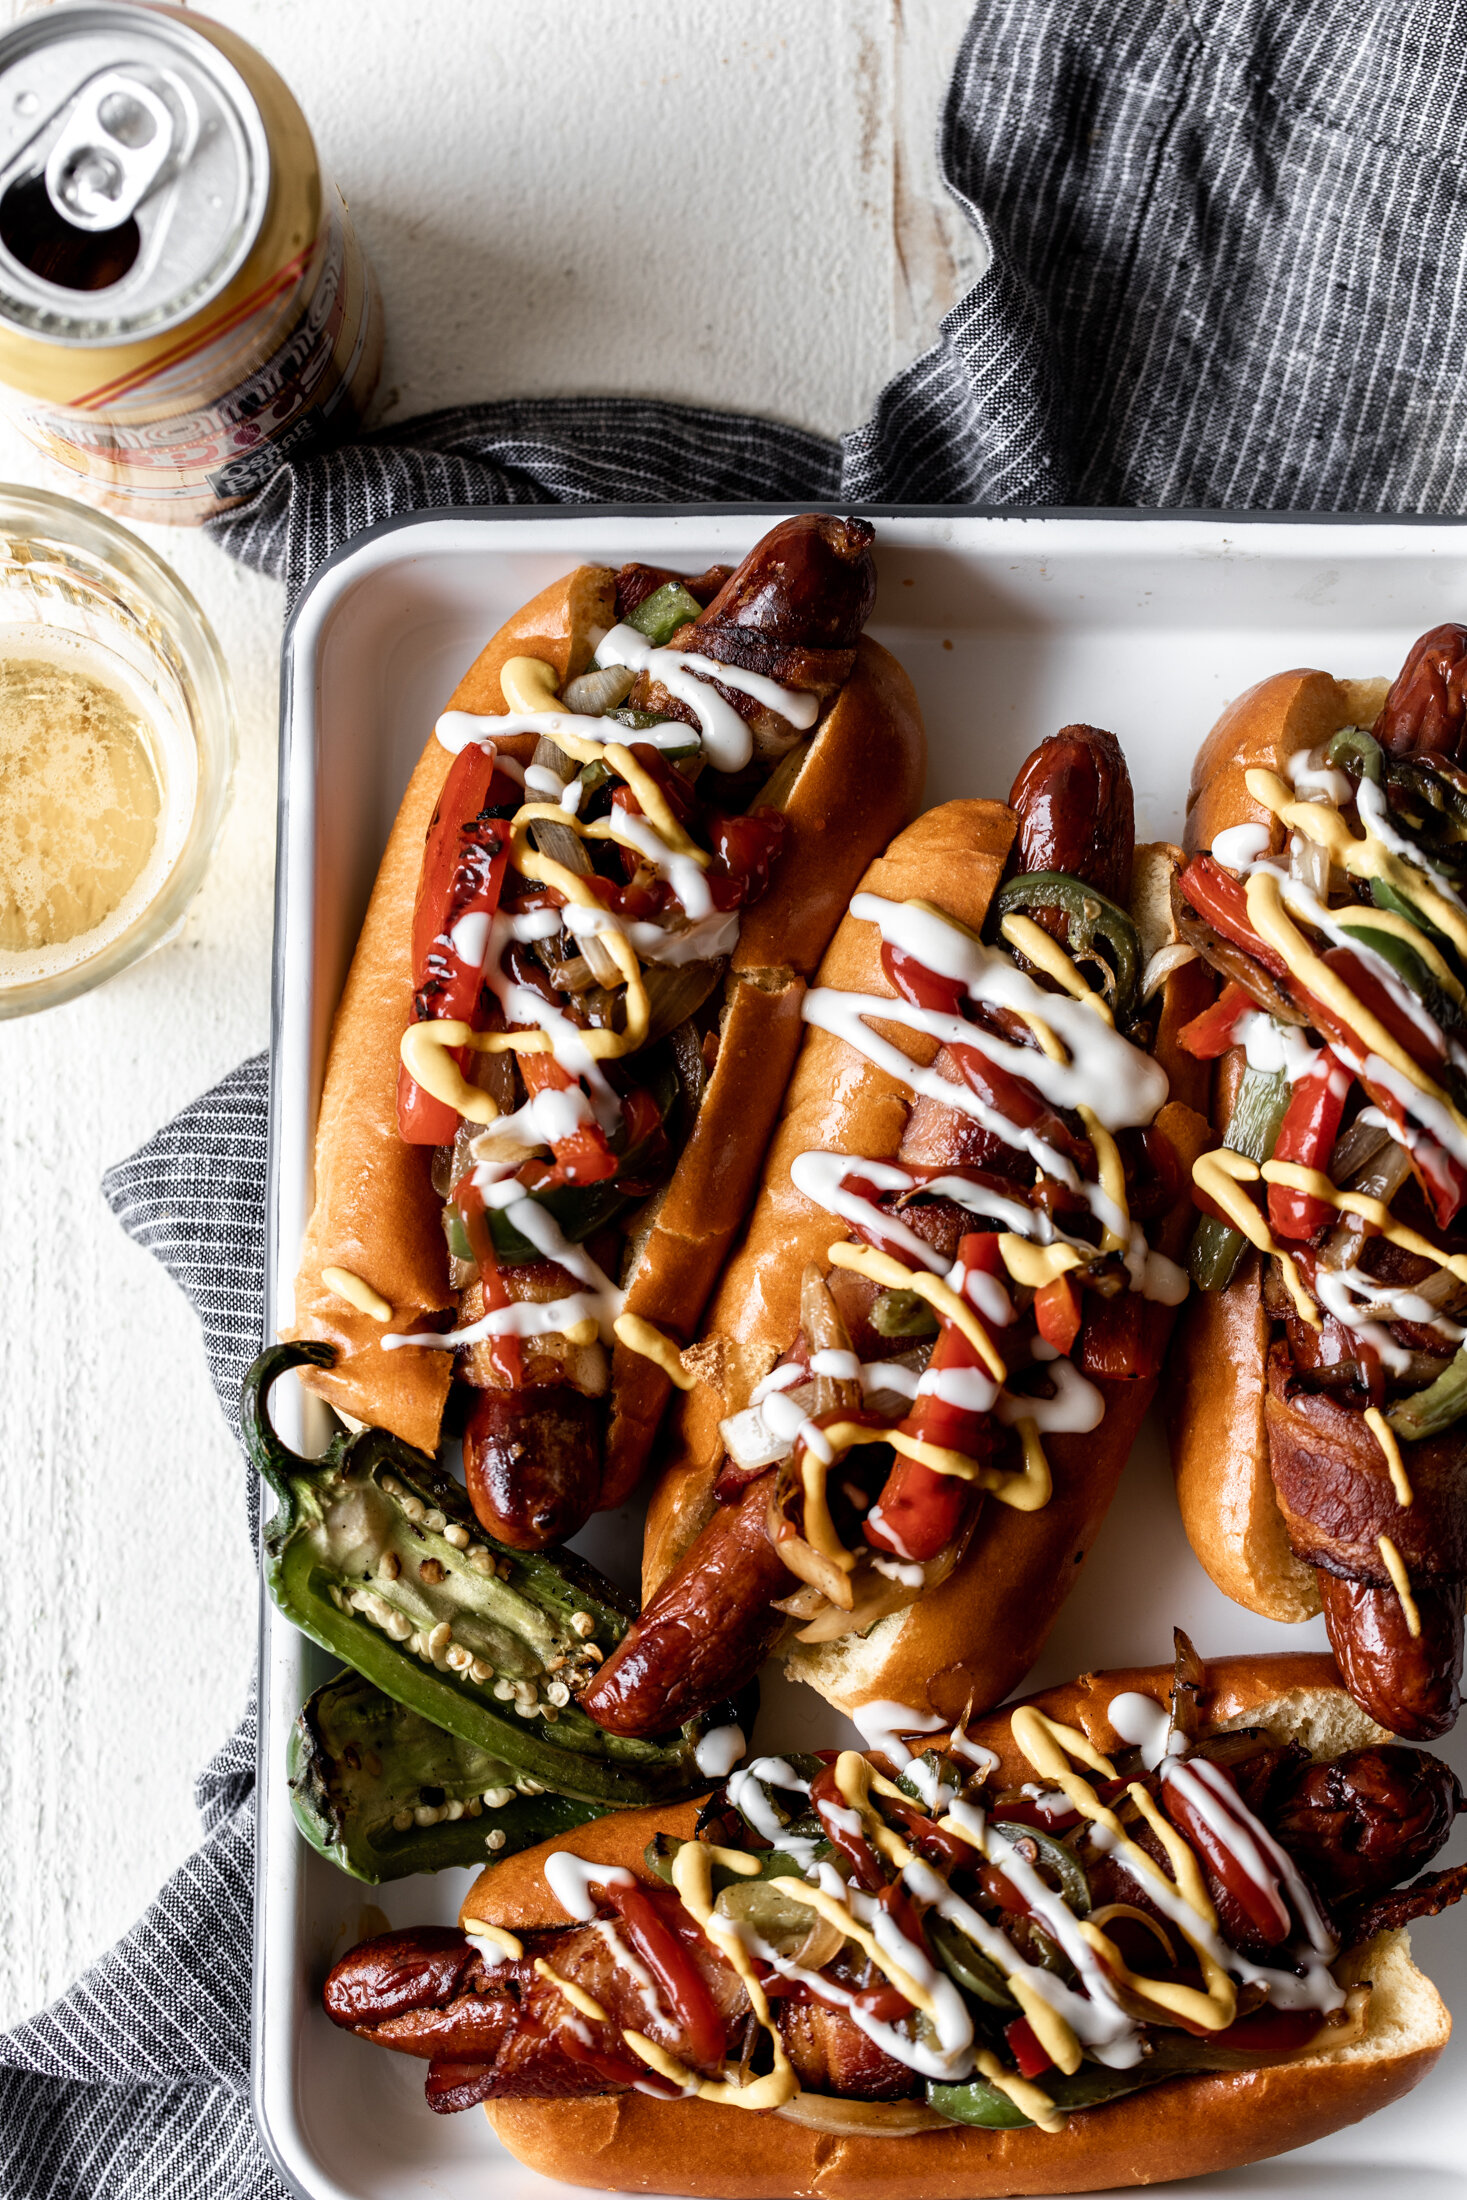 Bacon Wrapped Hot Dogs aka Danger Dogs — Cooking with Cocktail Rings